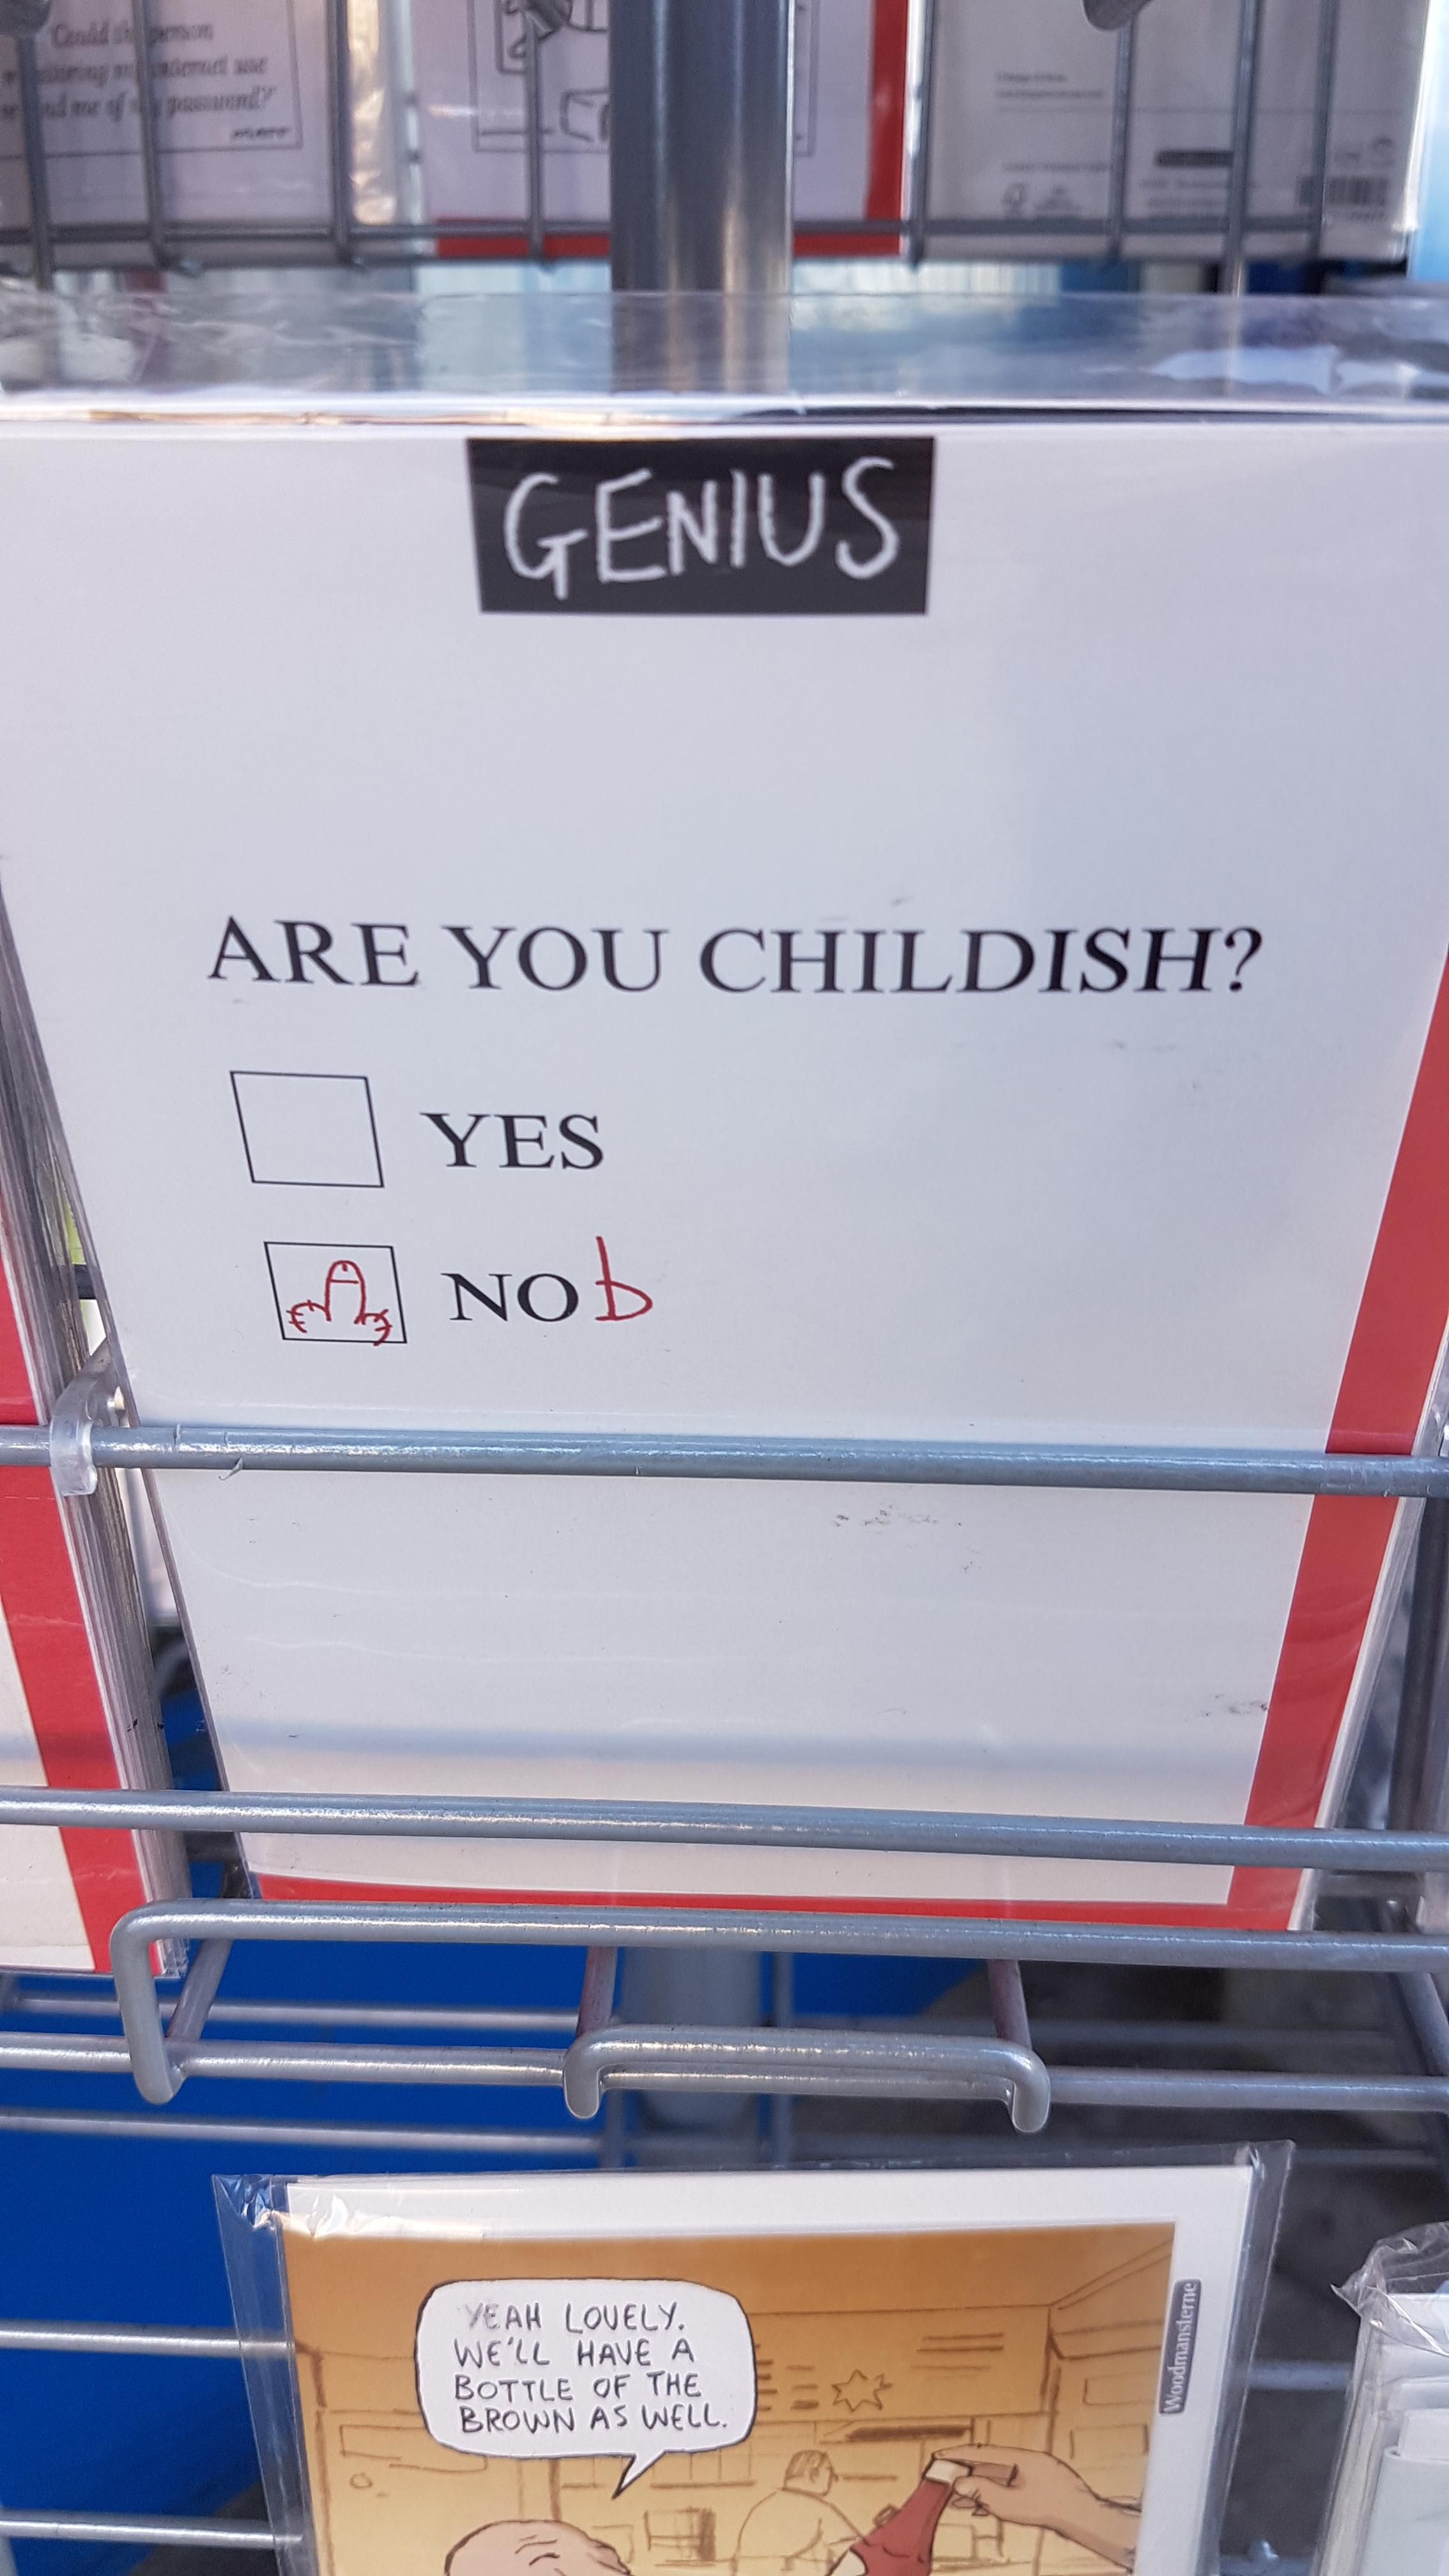 Are you childish?